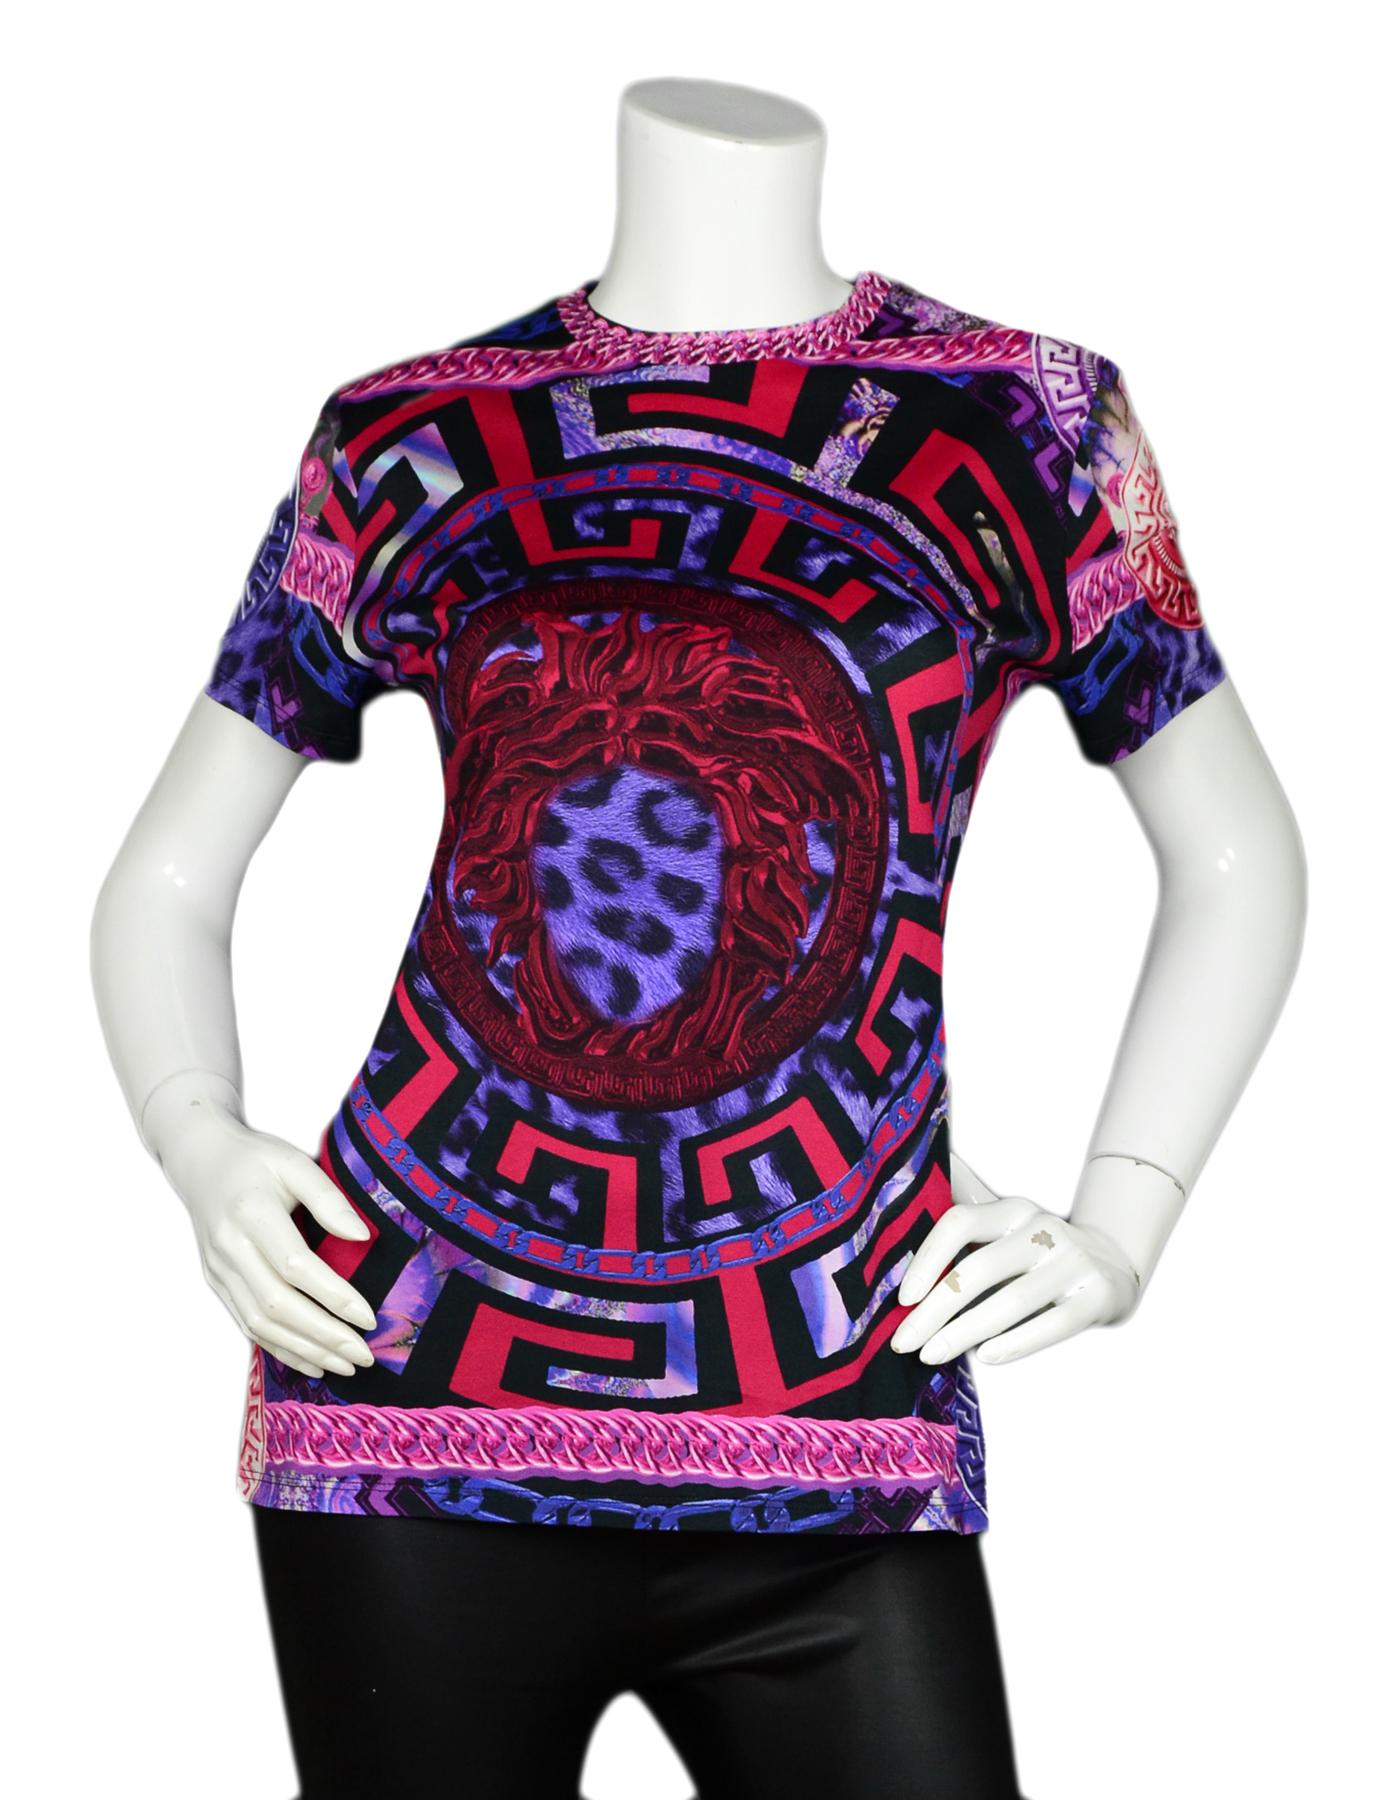 Versace Purple Red Medusa Logo T-Shirt sz 8

Made In: Italy
Color: Purple, Red
Materials: 100% Cotton
Lining: 100% Cotton
Opening/Closure: Slip-on
Overall Condition: Excellent pre-owned condition

Tag Size: IT44- equivalent to a US 8*Please refer to